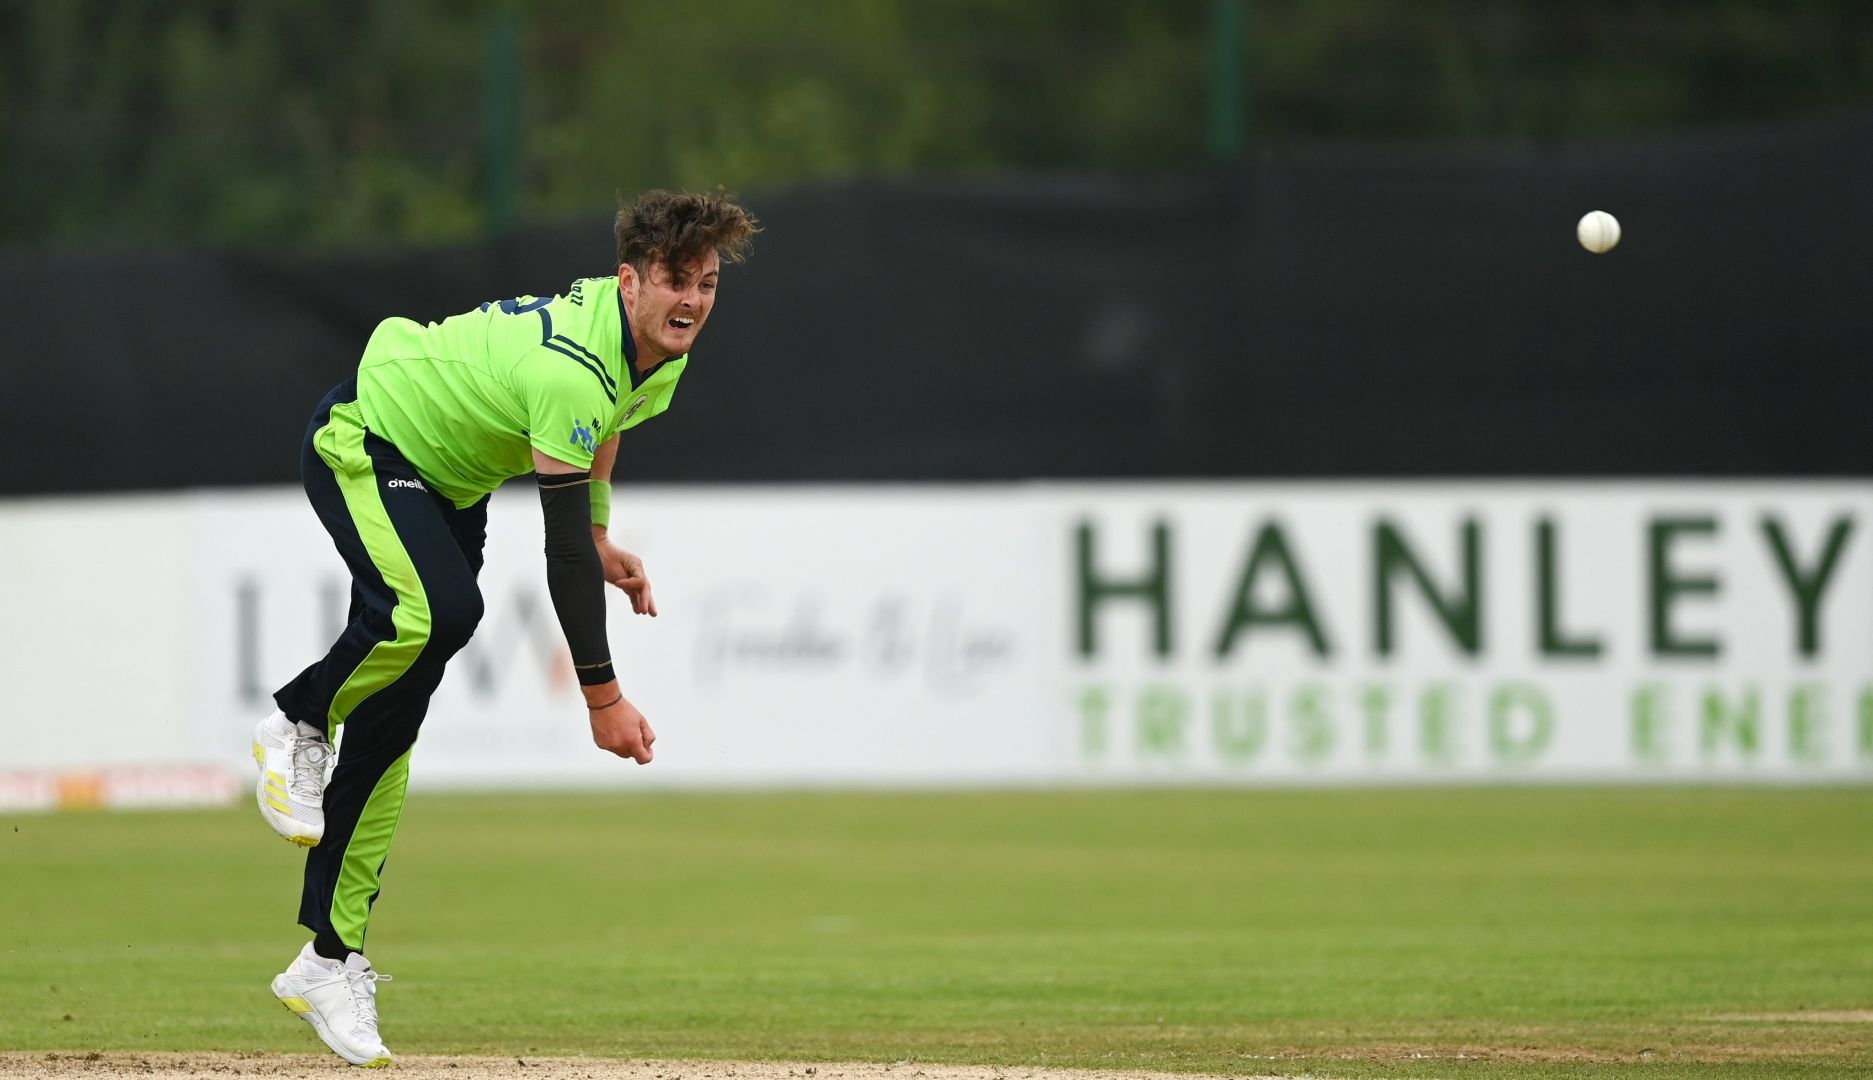 IRE vs ZIM | Mark Adair’s career-best bowling figures gives Ireland unassailable lead in T20I series